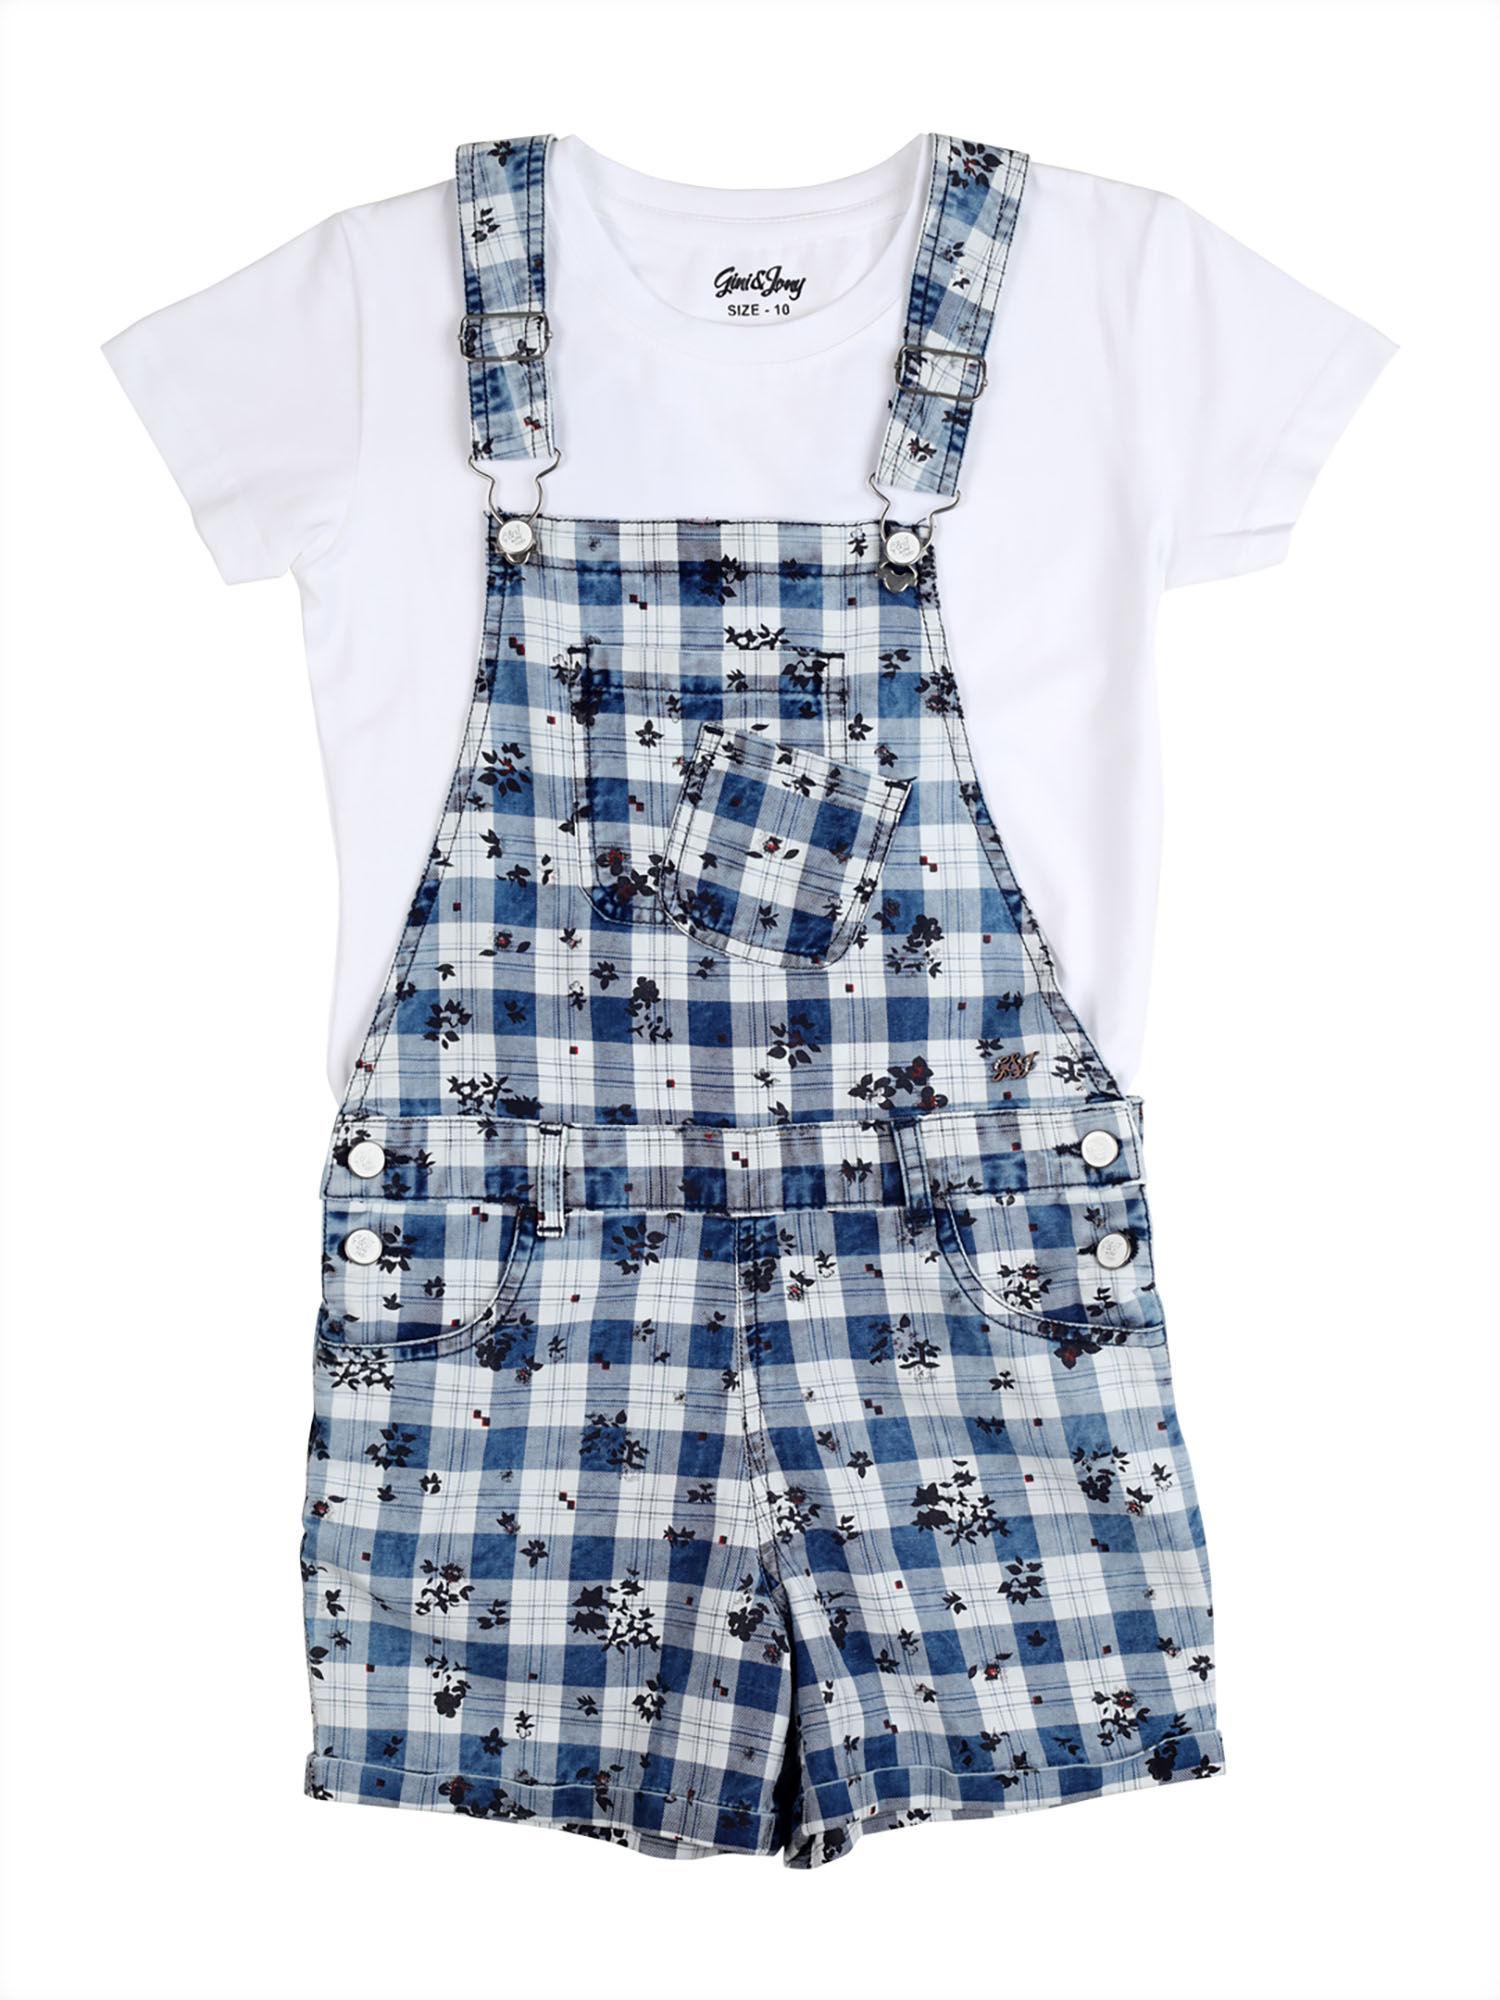 white color printed dungaree